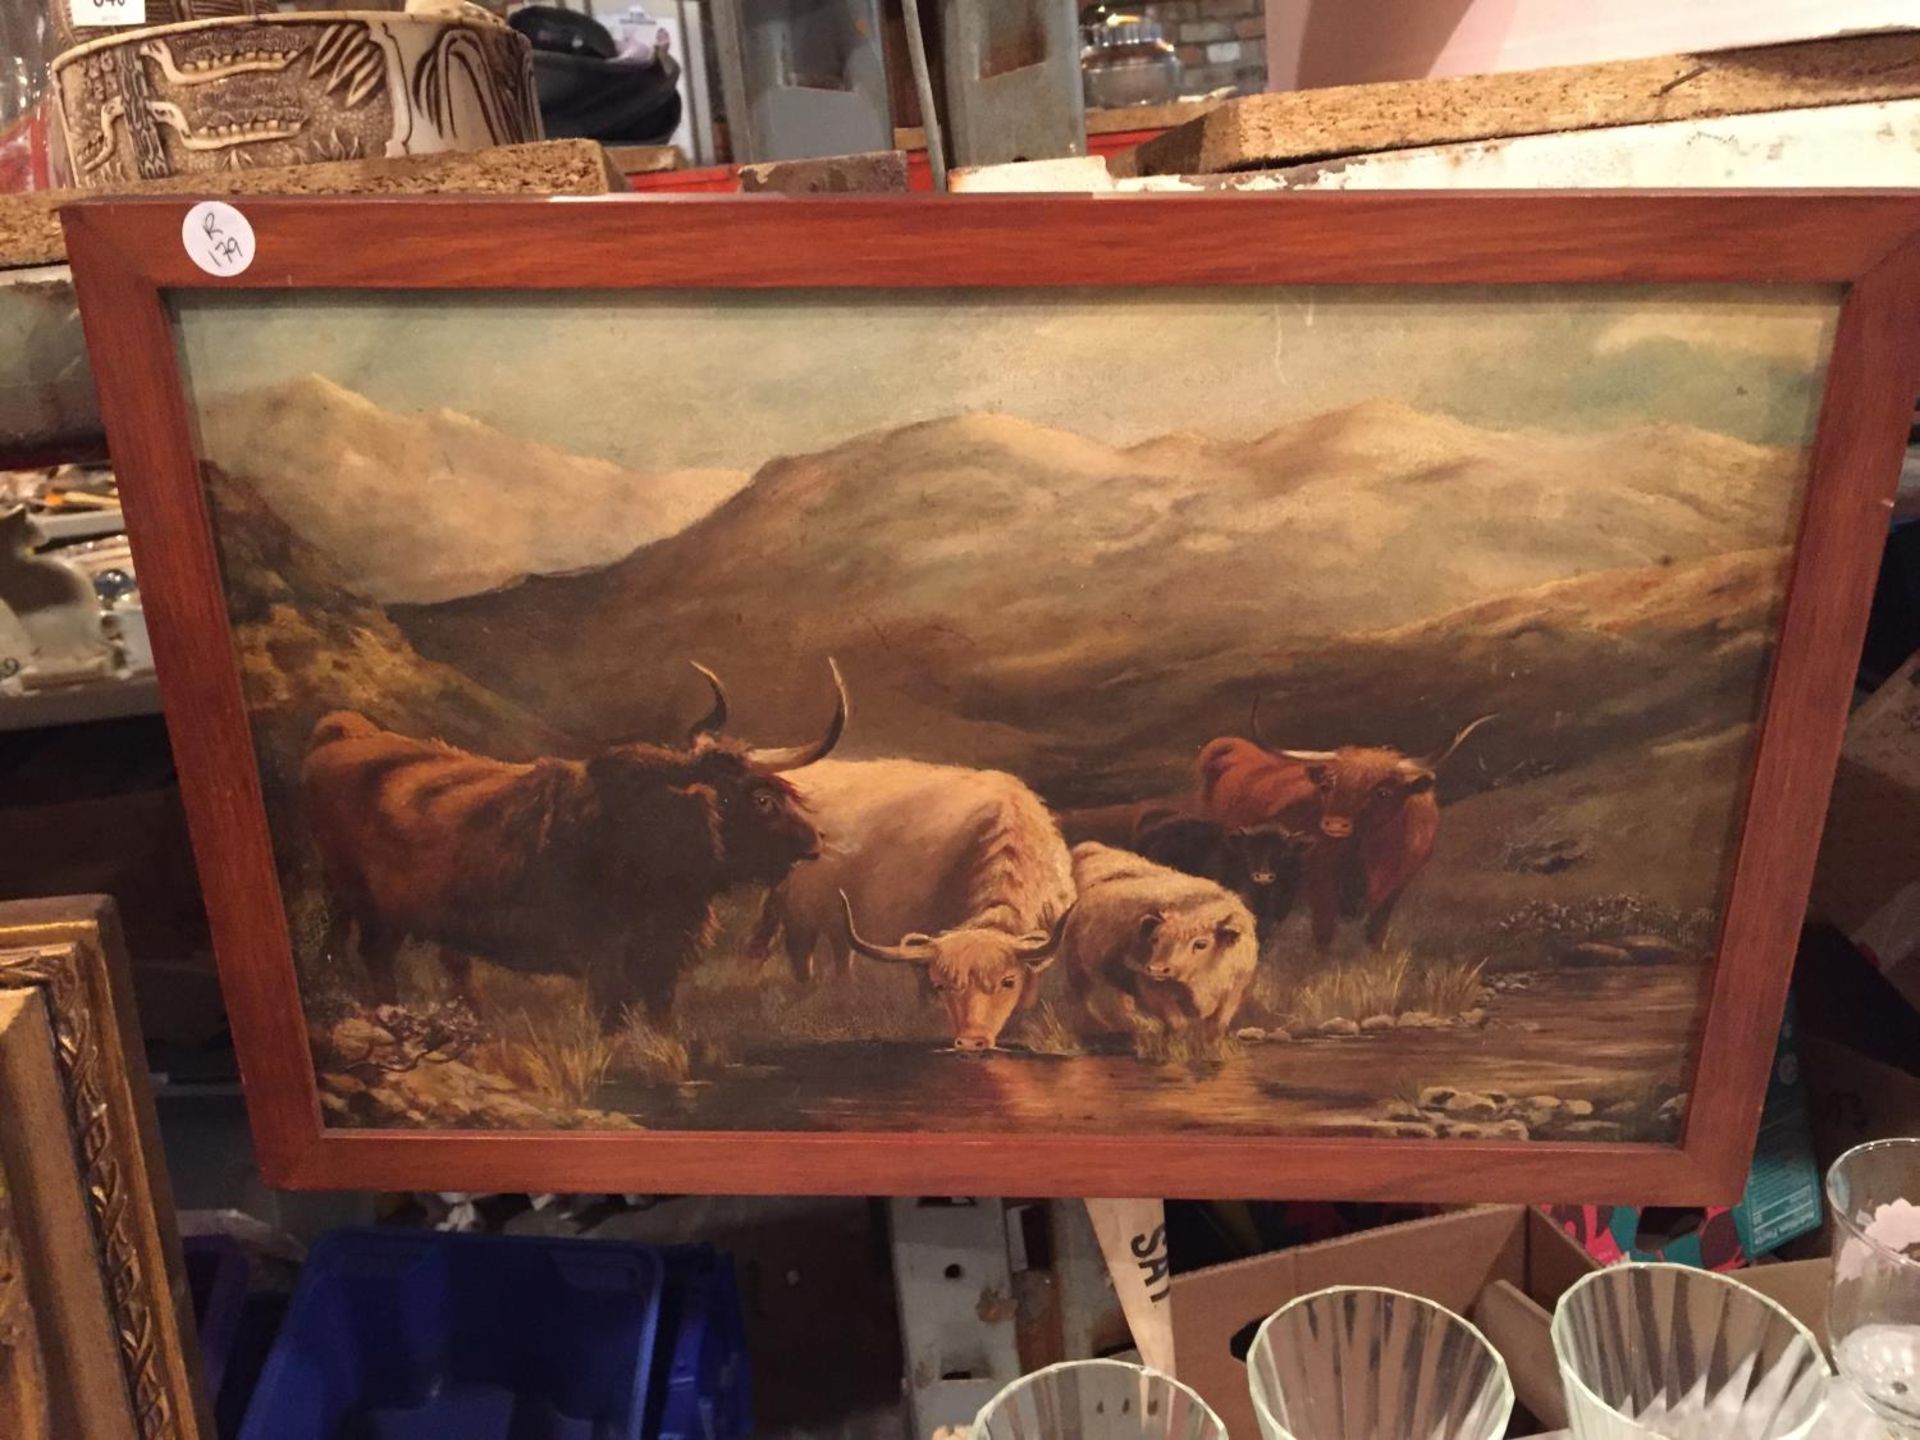 A WOODEN FRAMED PICTURE OF CATTLE AT A RIVER - Image 2 of 3